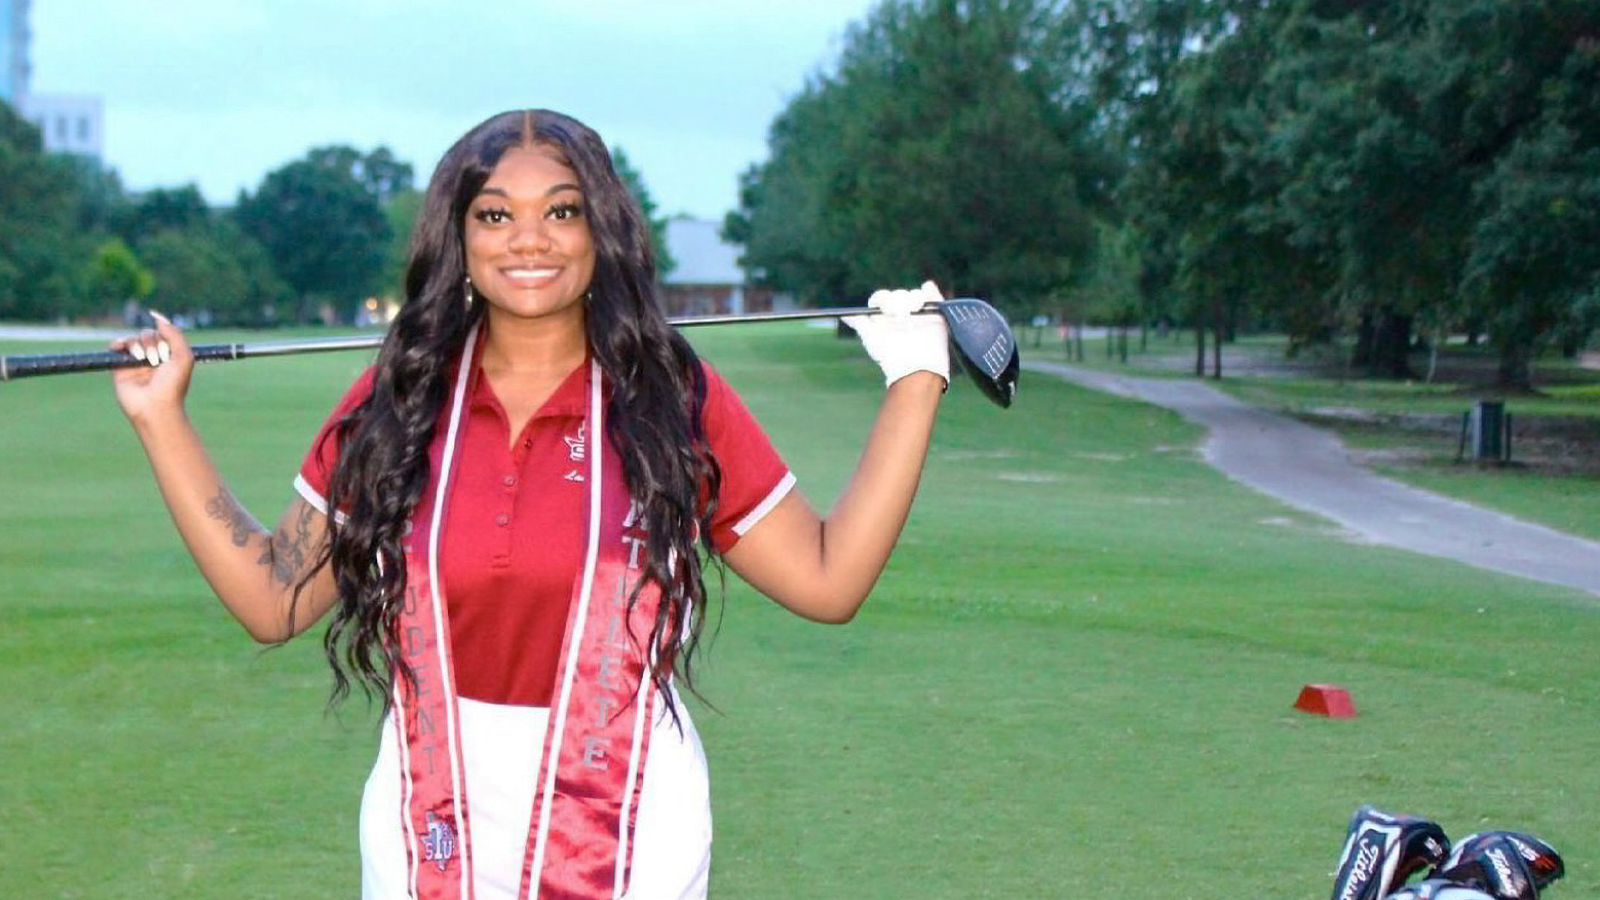 Paul Millsap PGA WORKS fellow Destany Hall poses on the golf course. 